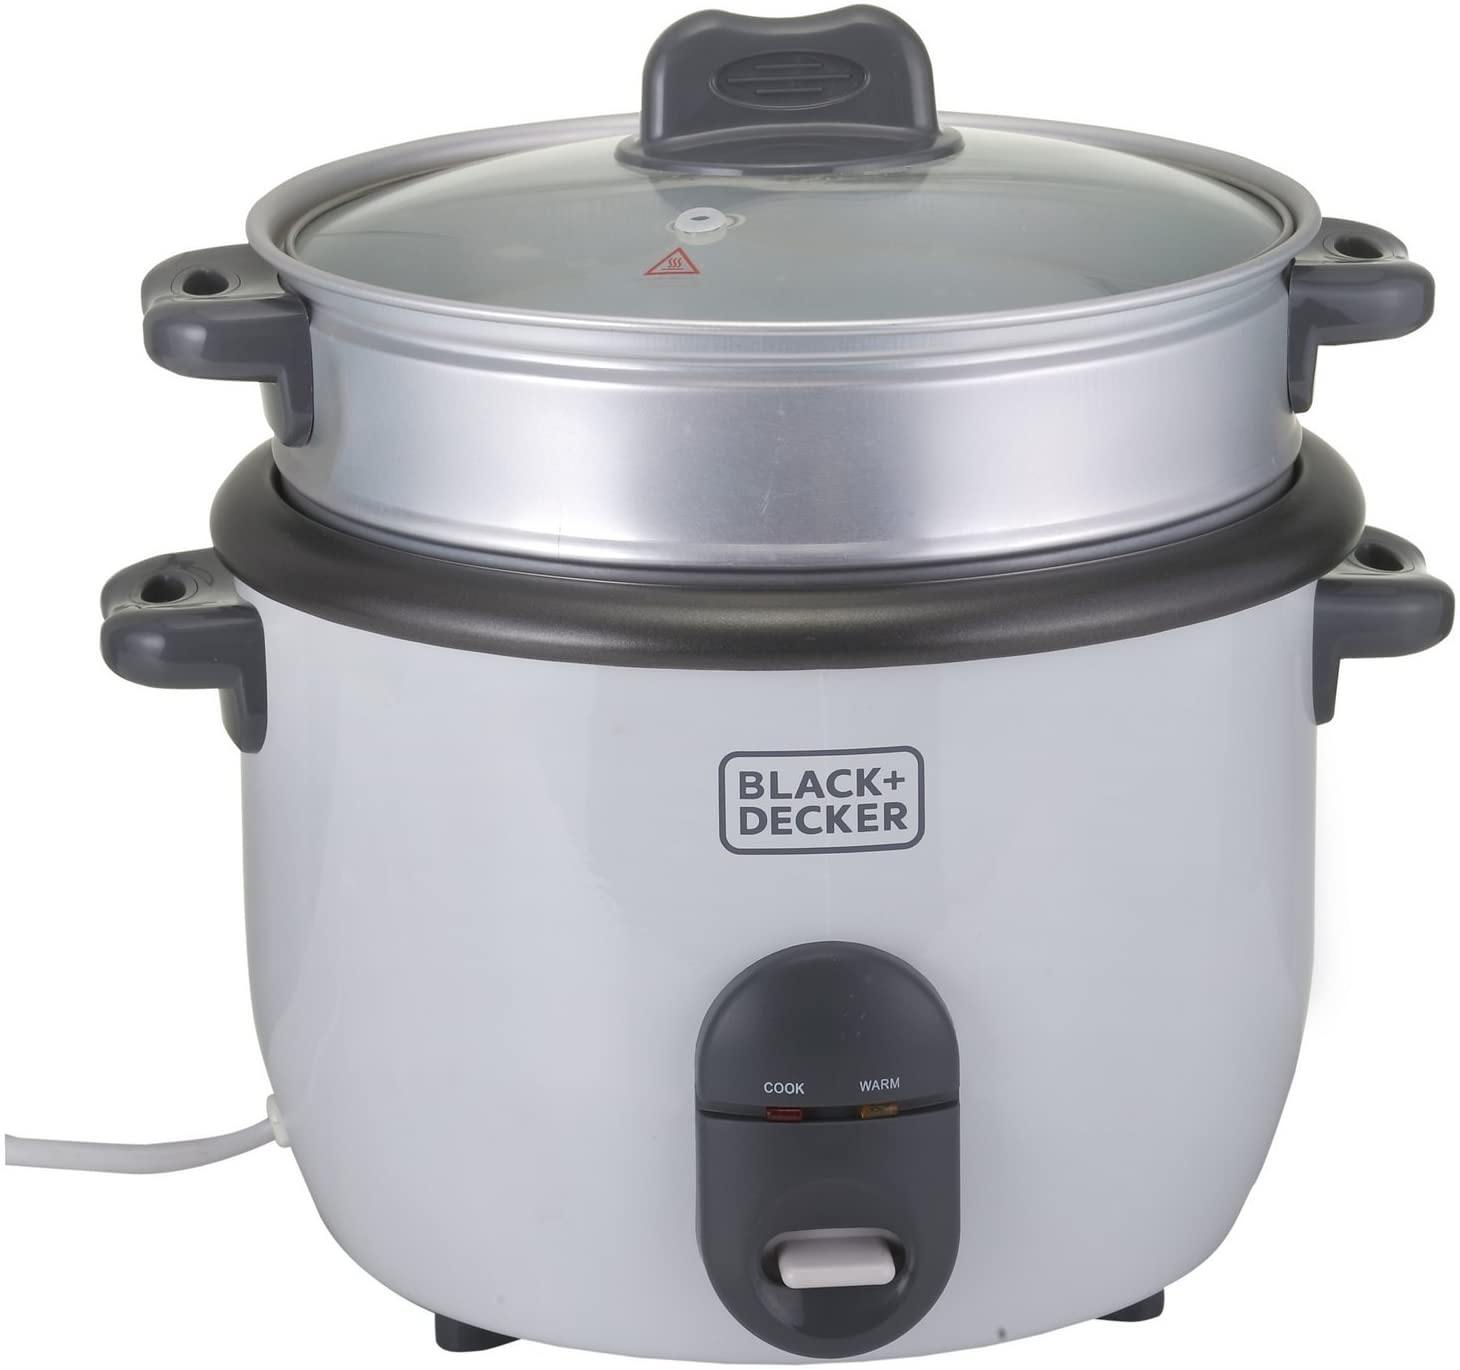 Black+Decker 1.8 Ltr. Non Stick Rice Cooker with Glass Lid